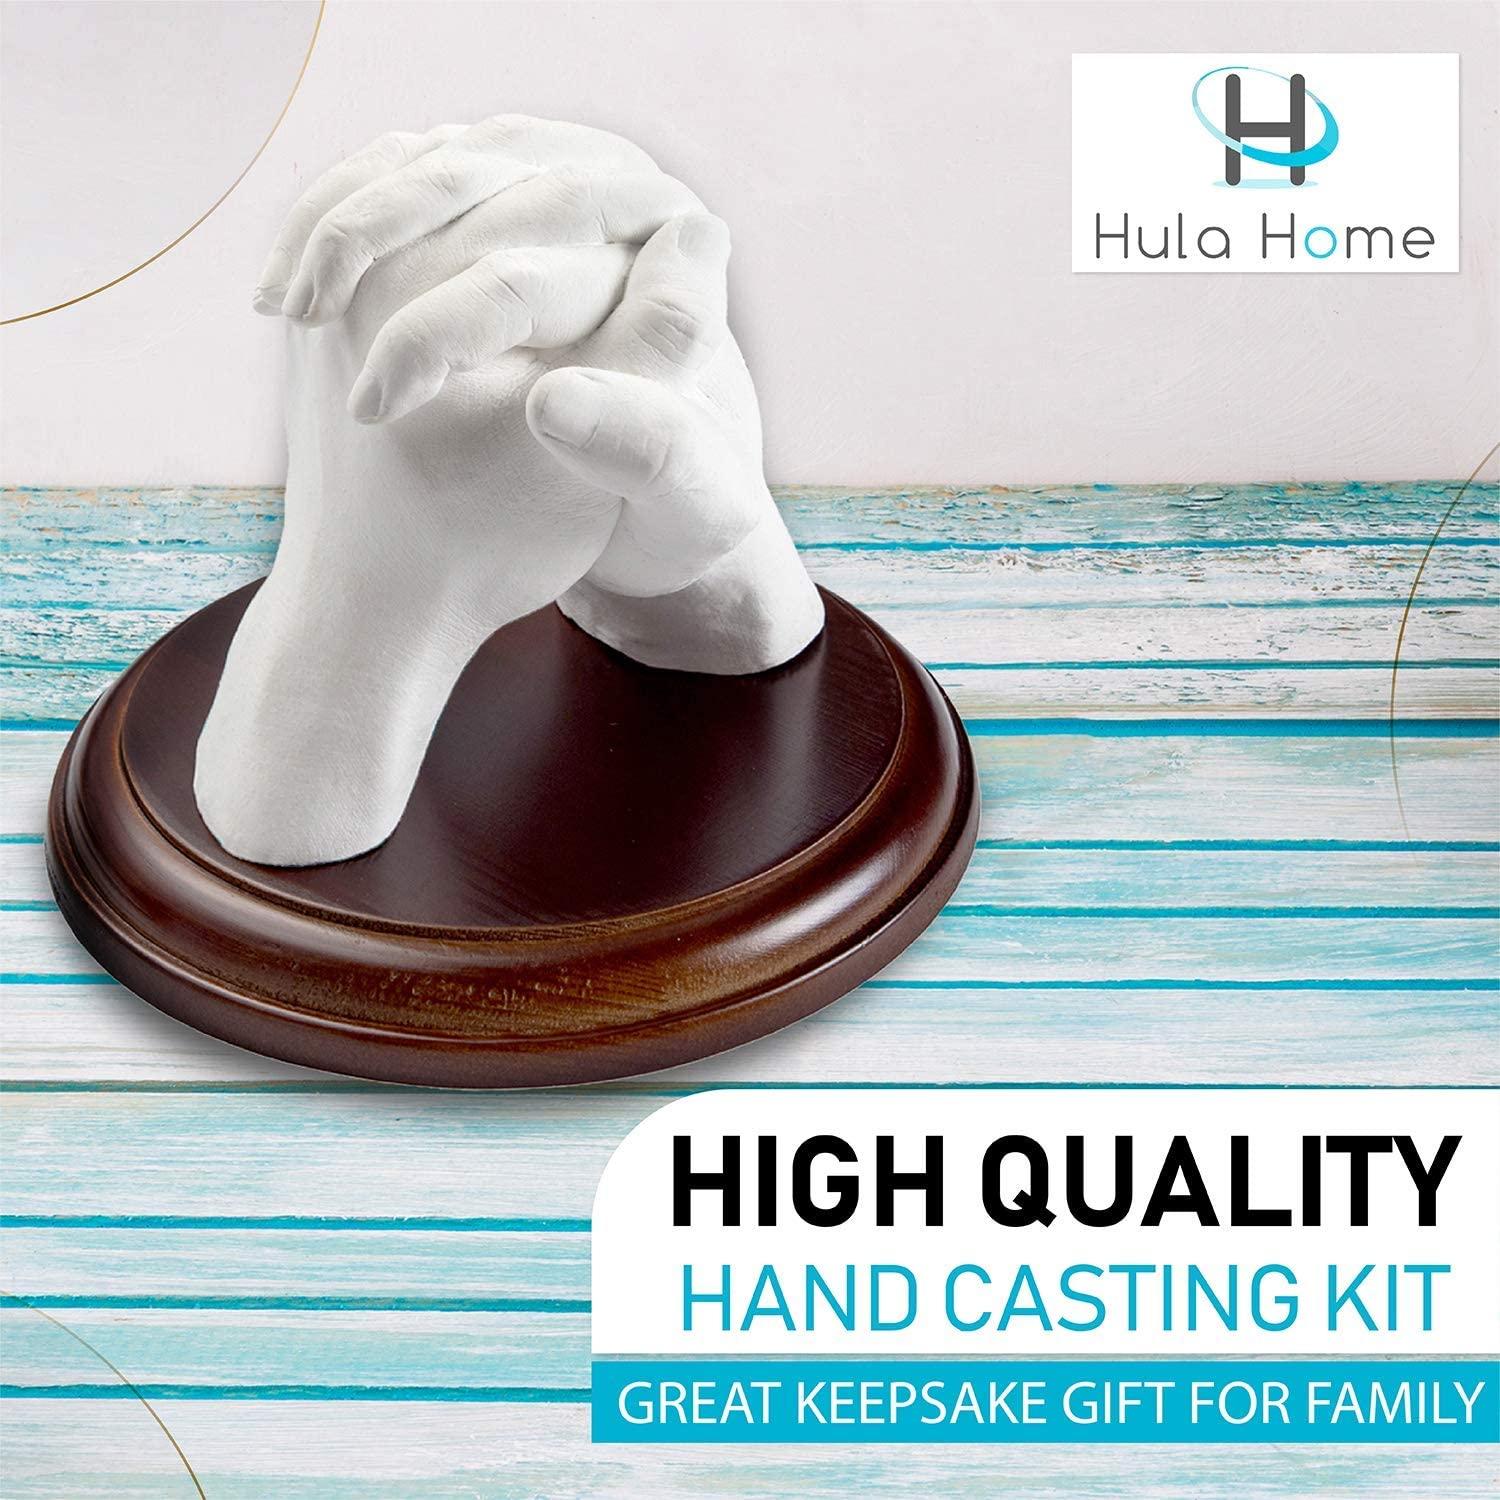 Hand Casting Kit for Couples or Family